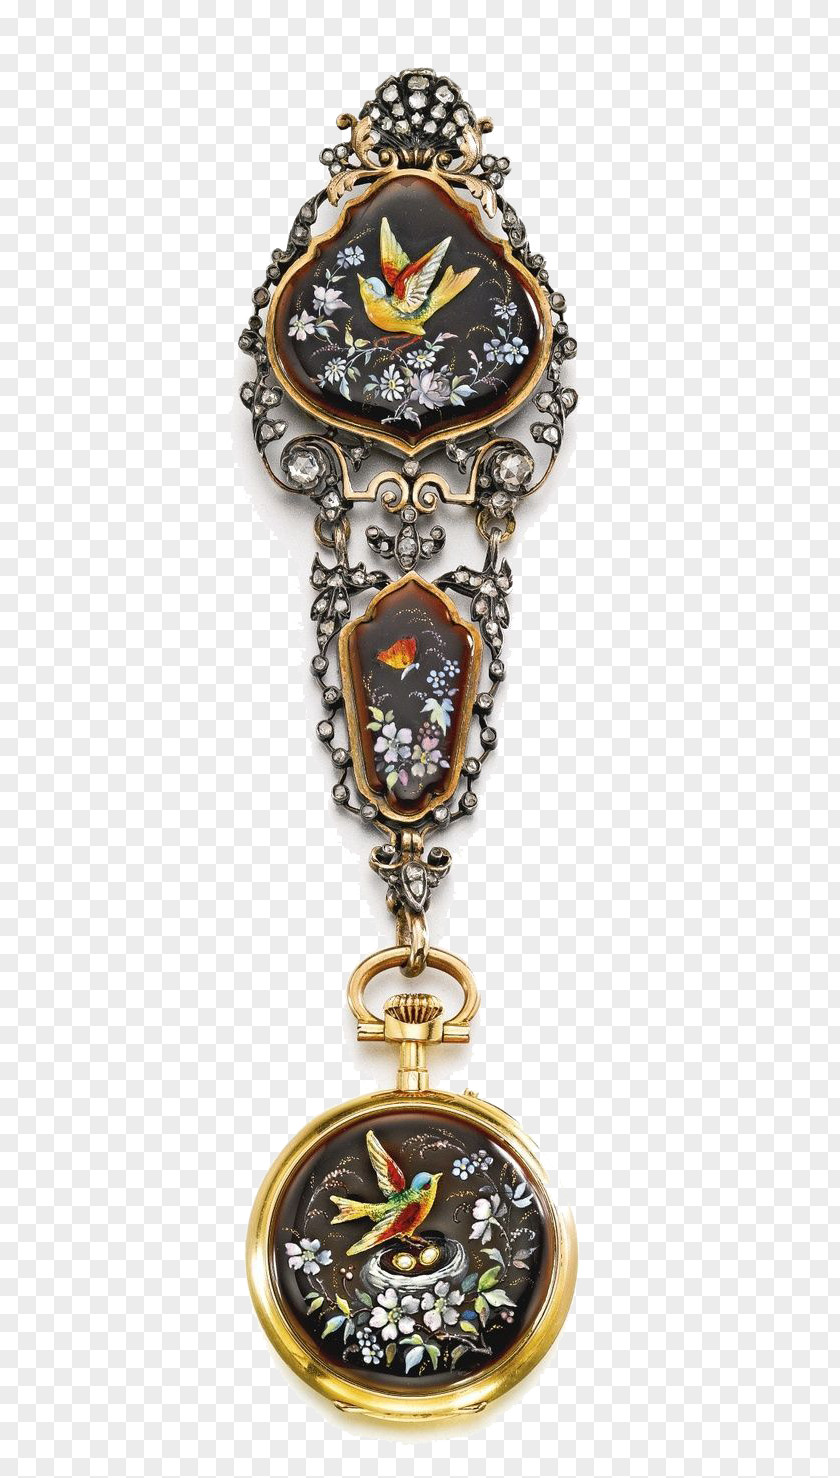 Watch Pocket Clock Jewellery Chatelaine PNG